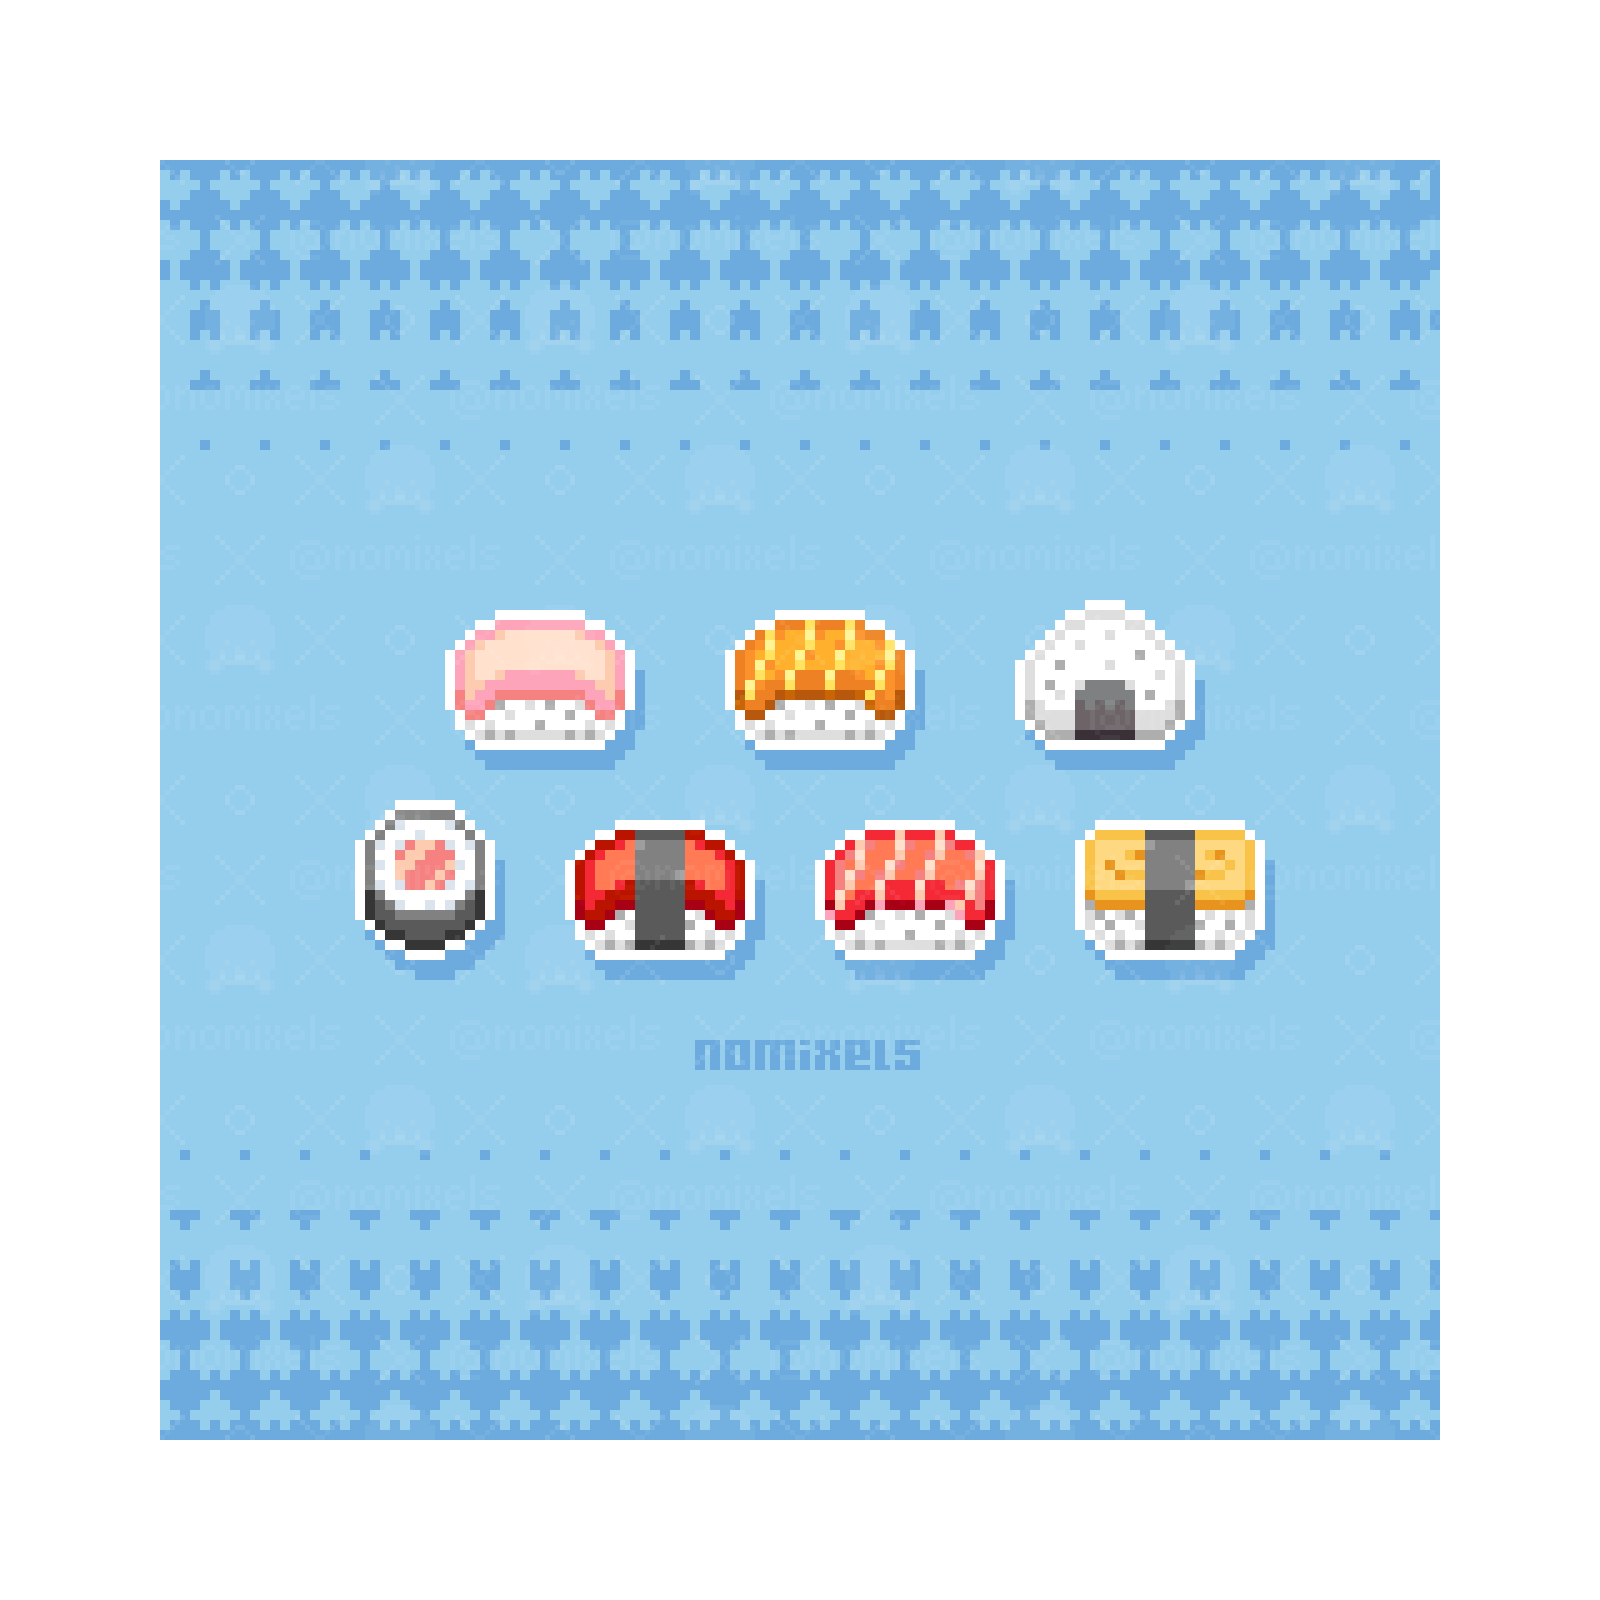 Pokedex - Stream Deck / Overlay - GingerJay91's Ko-fi Shop - Ko-fi ❤️ Where  creators get support from fans through donations, memberships, shop sales  and more! The original 'Buy Me a Coffee' Page.